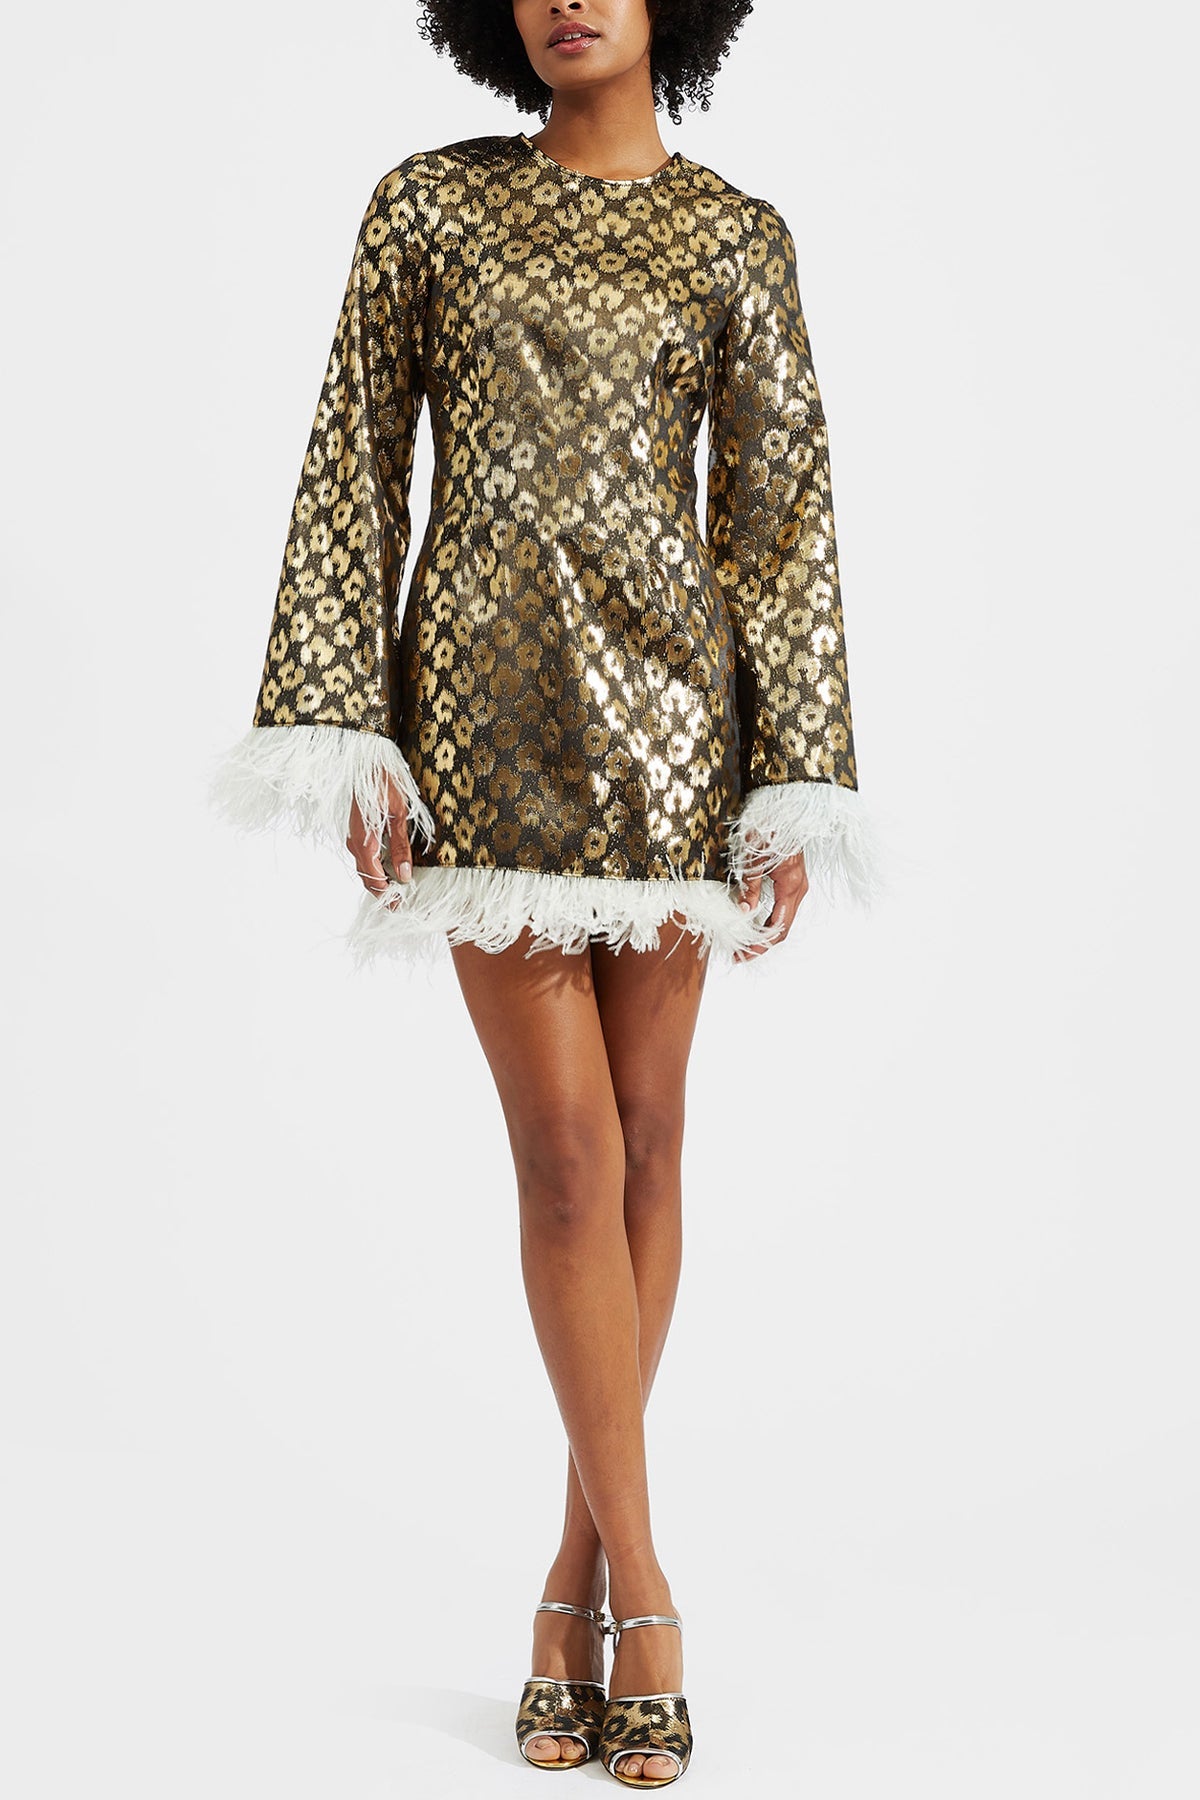 Twiggy Dress with Feathers in Leopard Chine - shop-olivia.com